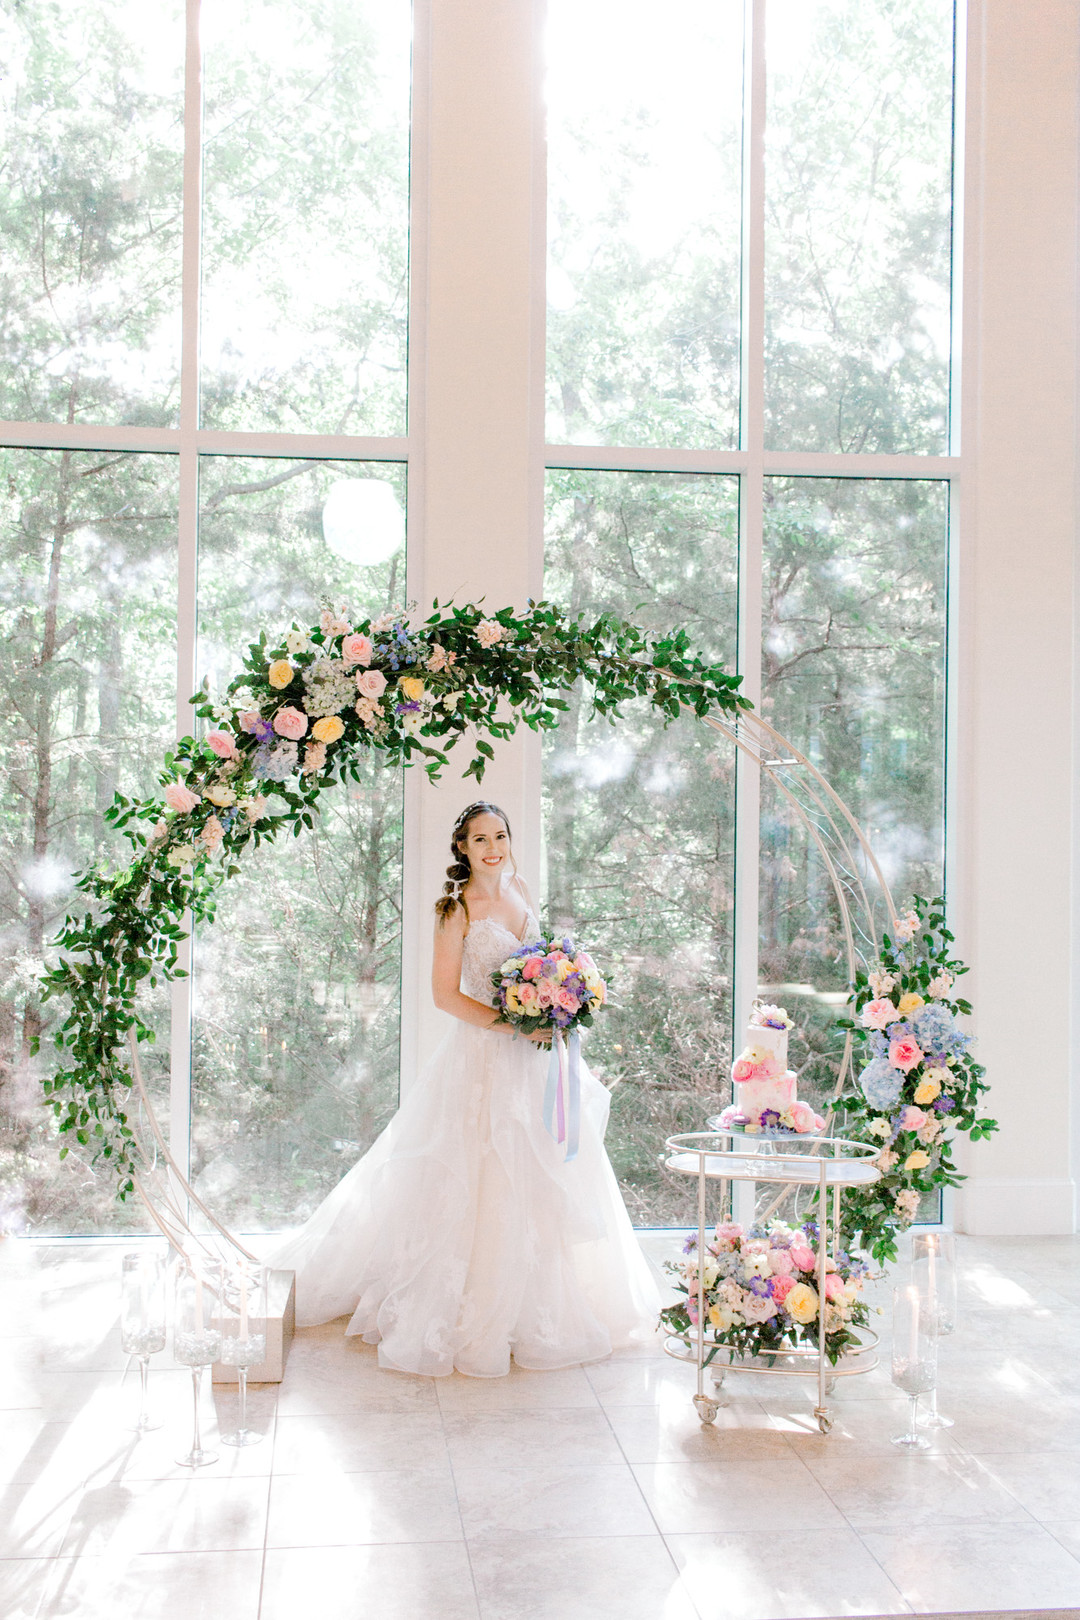 cost of flower arch for wedding